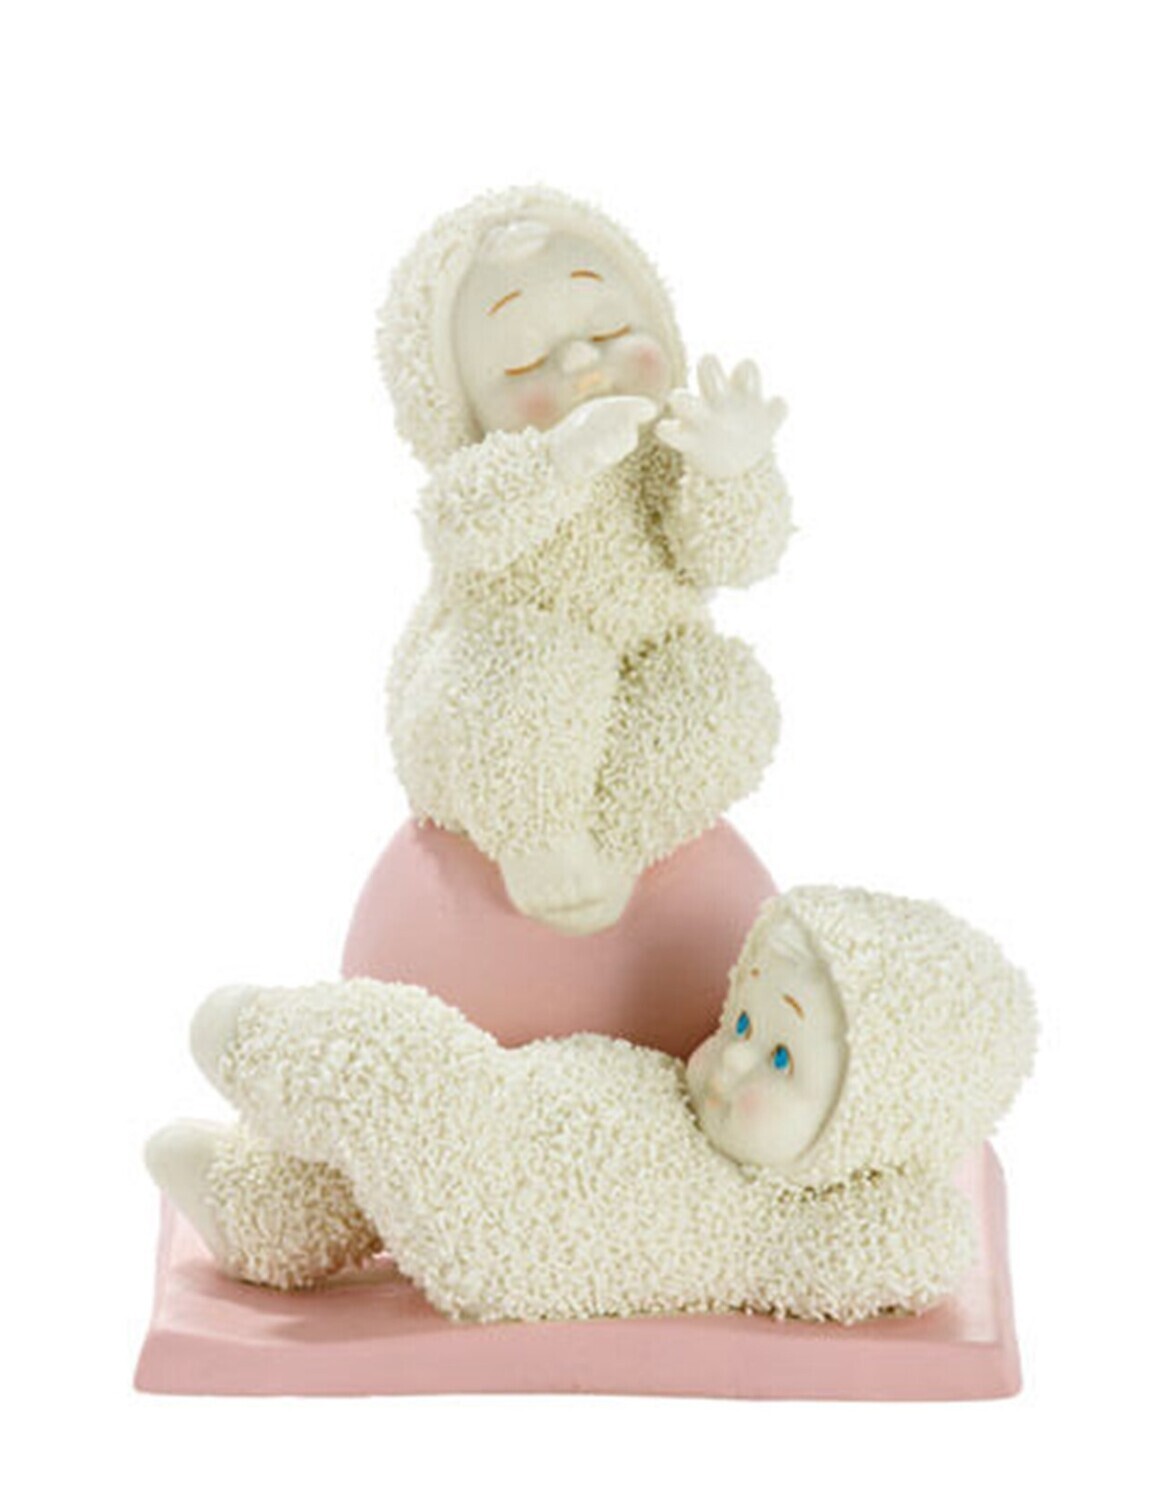 Department 56 Snowbabies Collection "You Work - I'll Count" Porcelain Figurine (​4027196​)